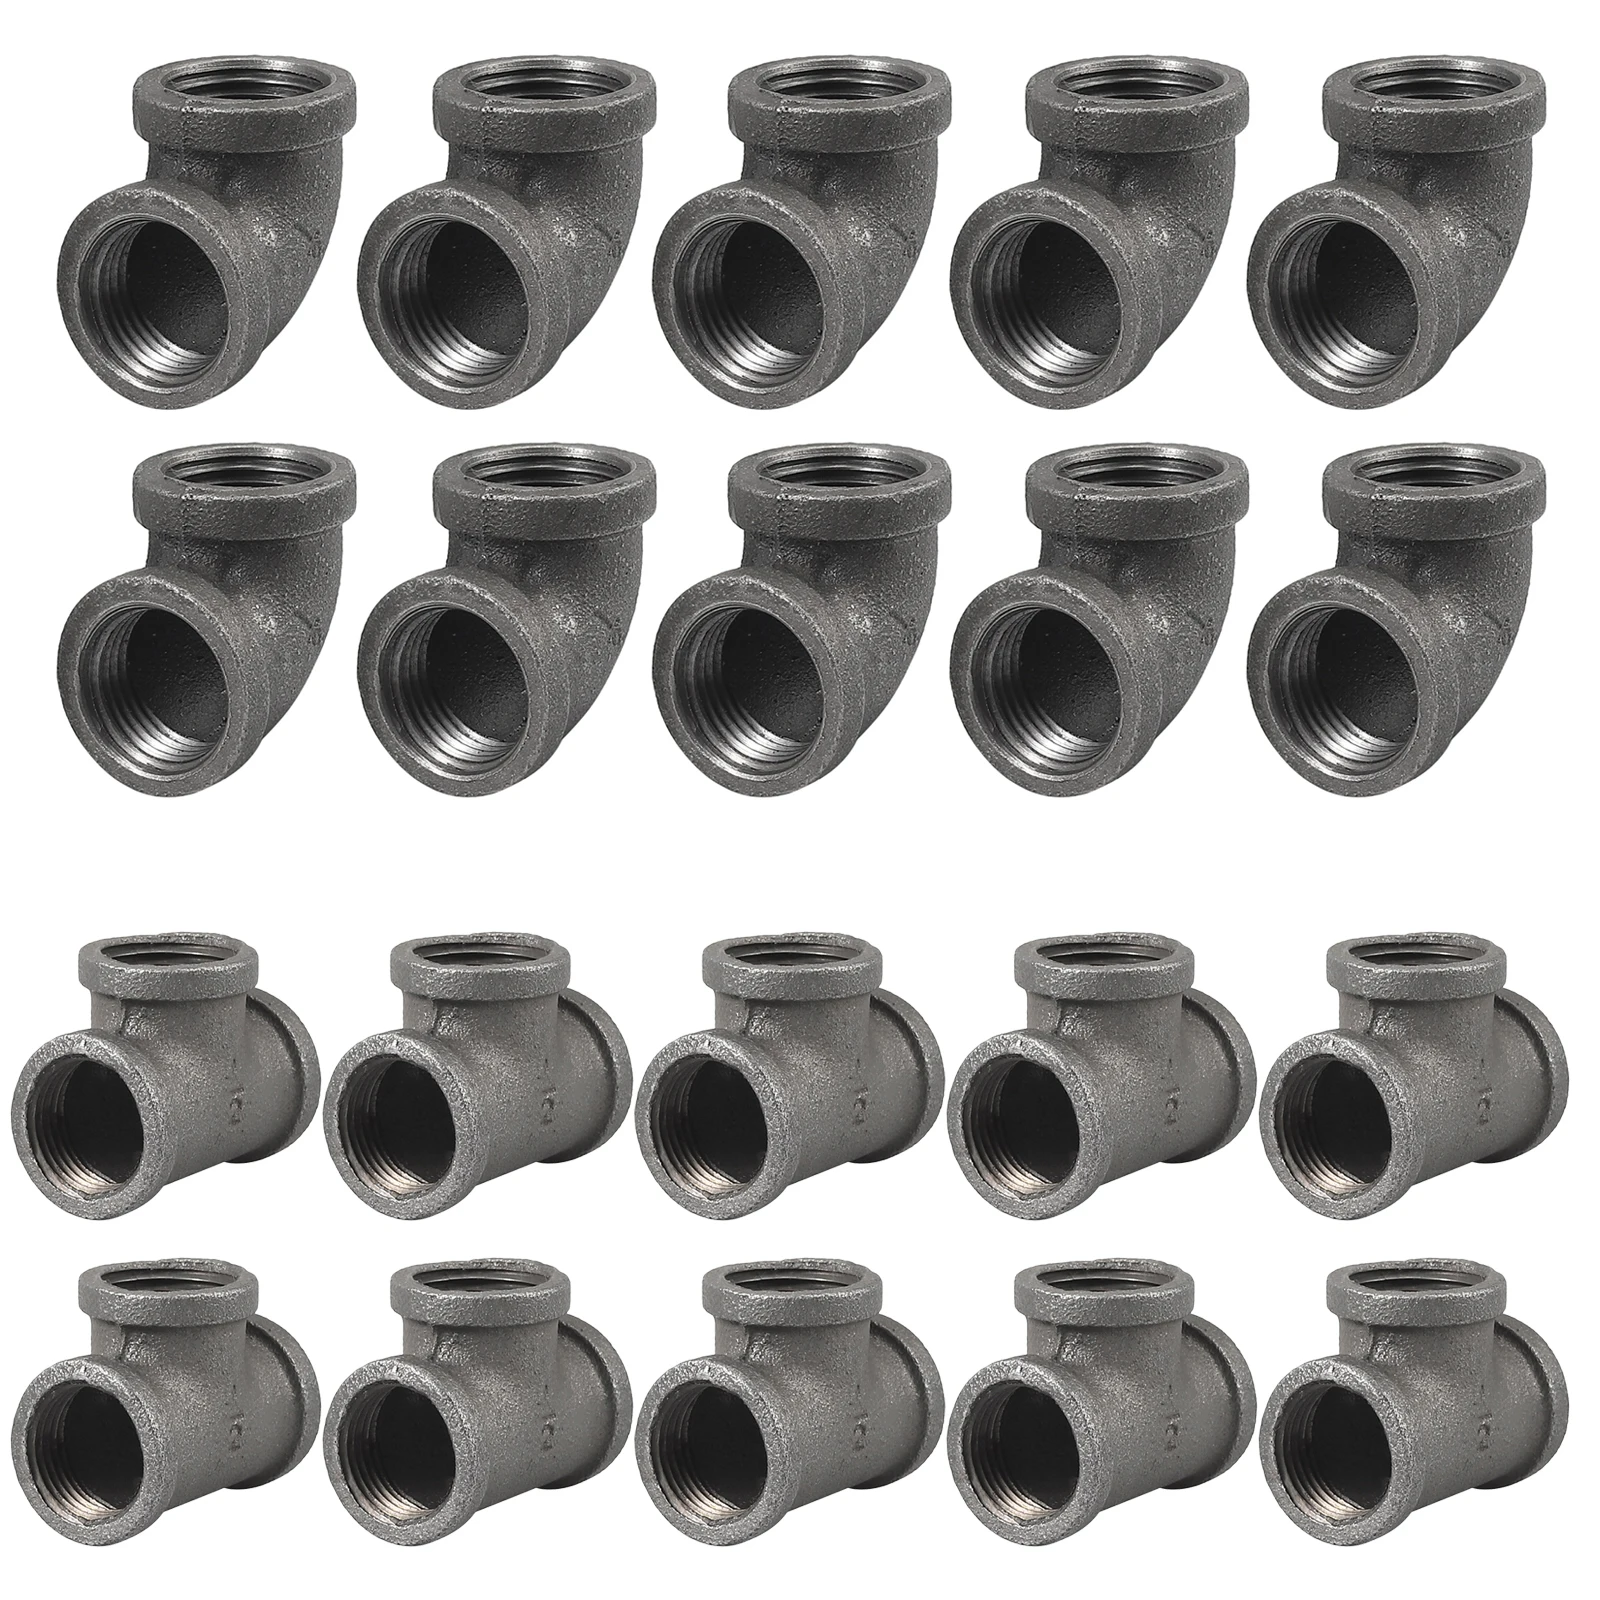 20PCS Black 1/2-Inch Malleable Iron Cast Elbow Pipe Fitting & Tees Pipe Fitting 